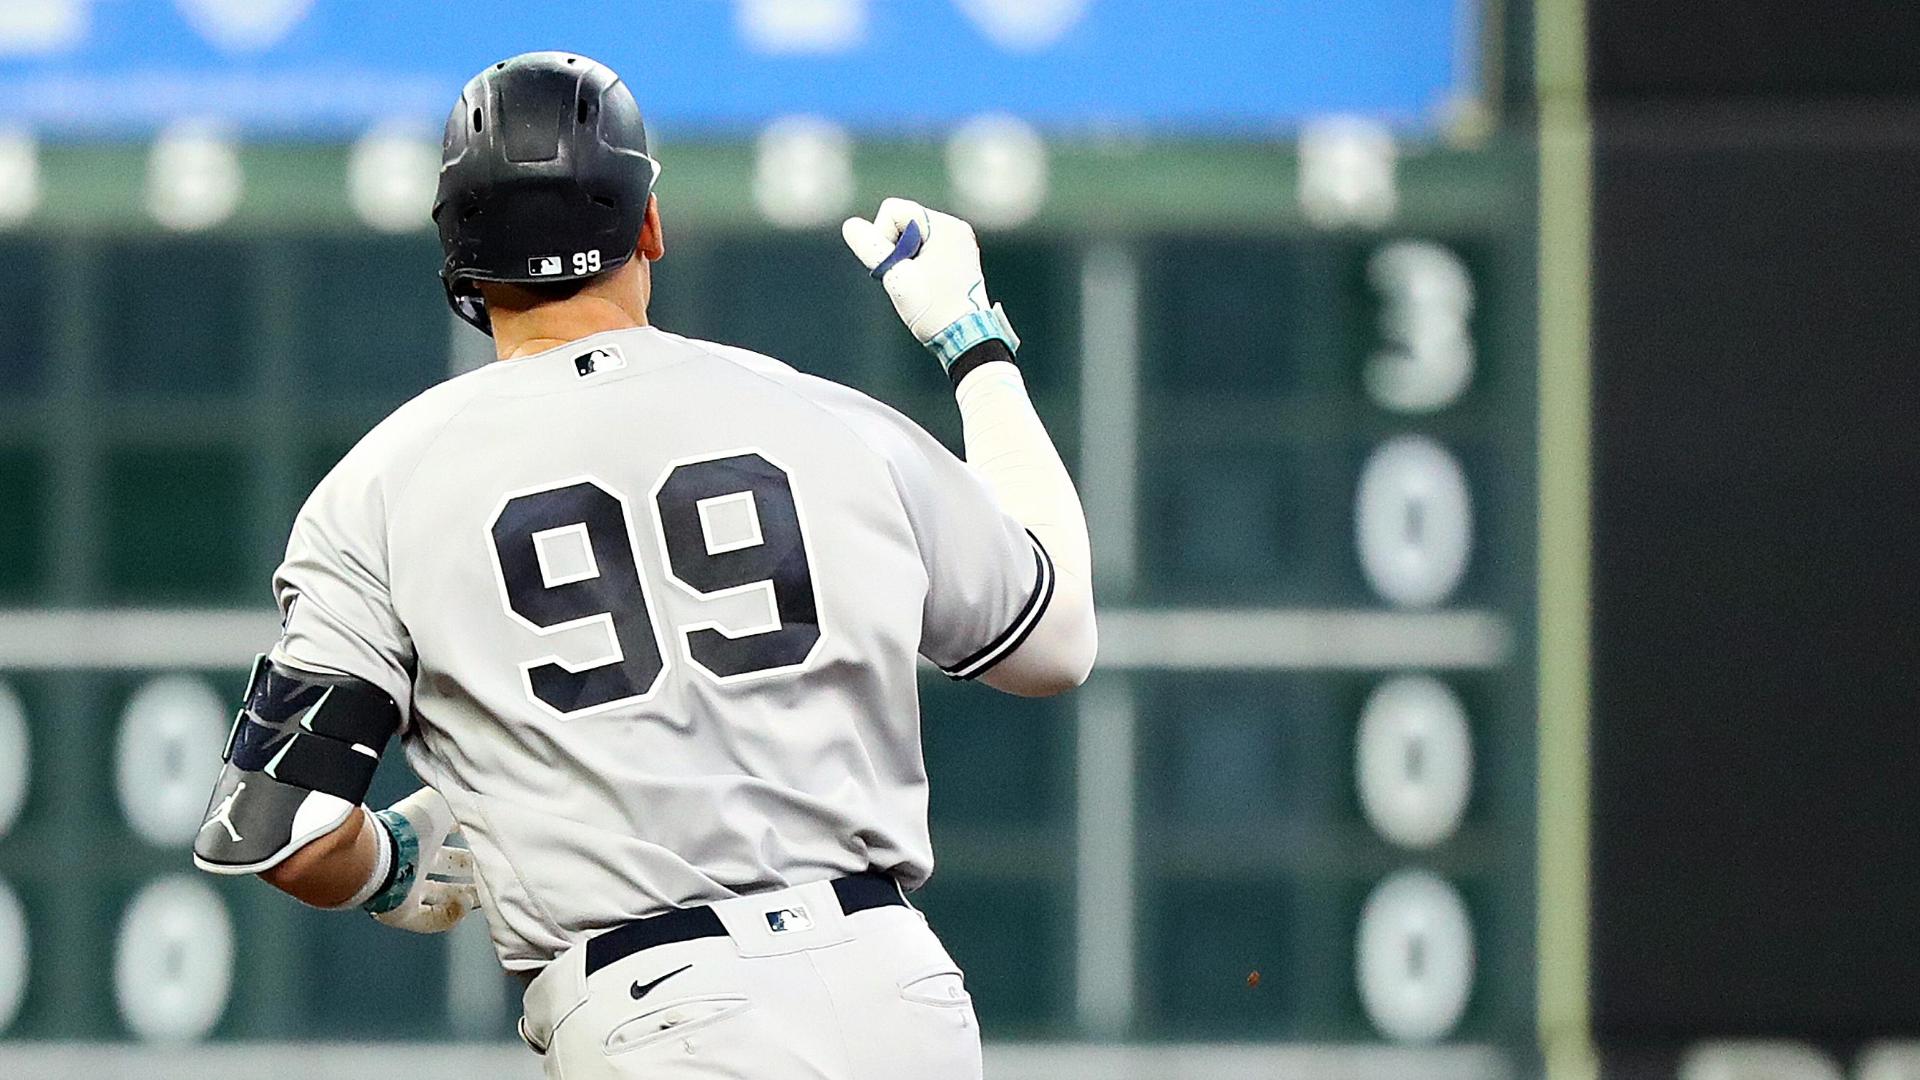 Yankees' Judge becomes fastest MLB player to 250 home runs with a